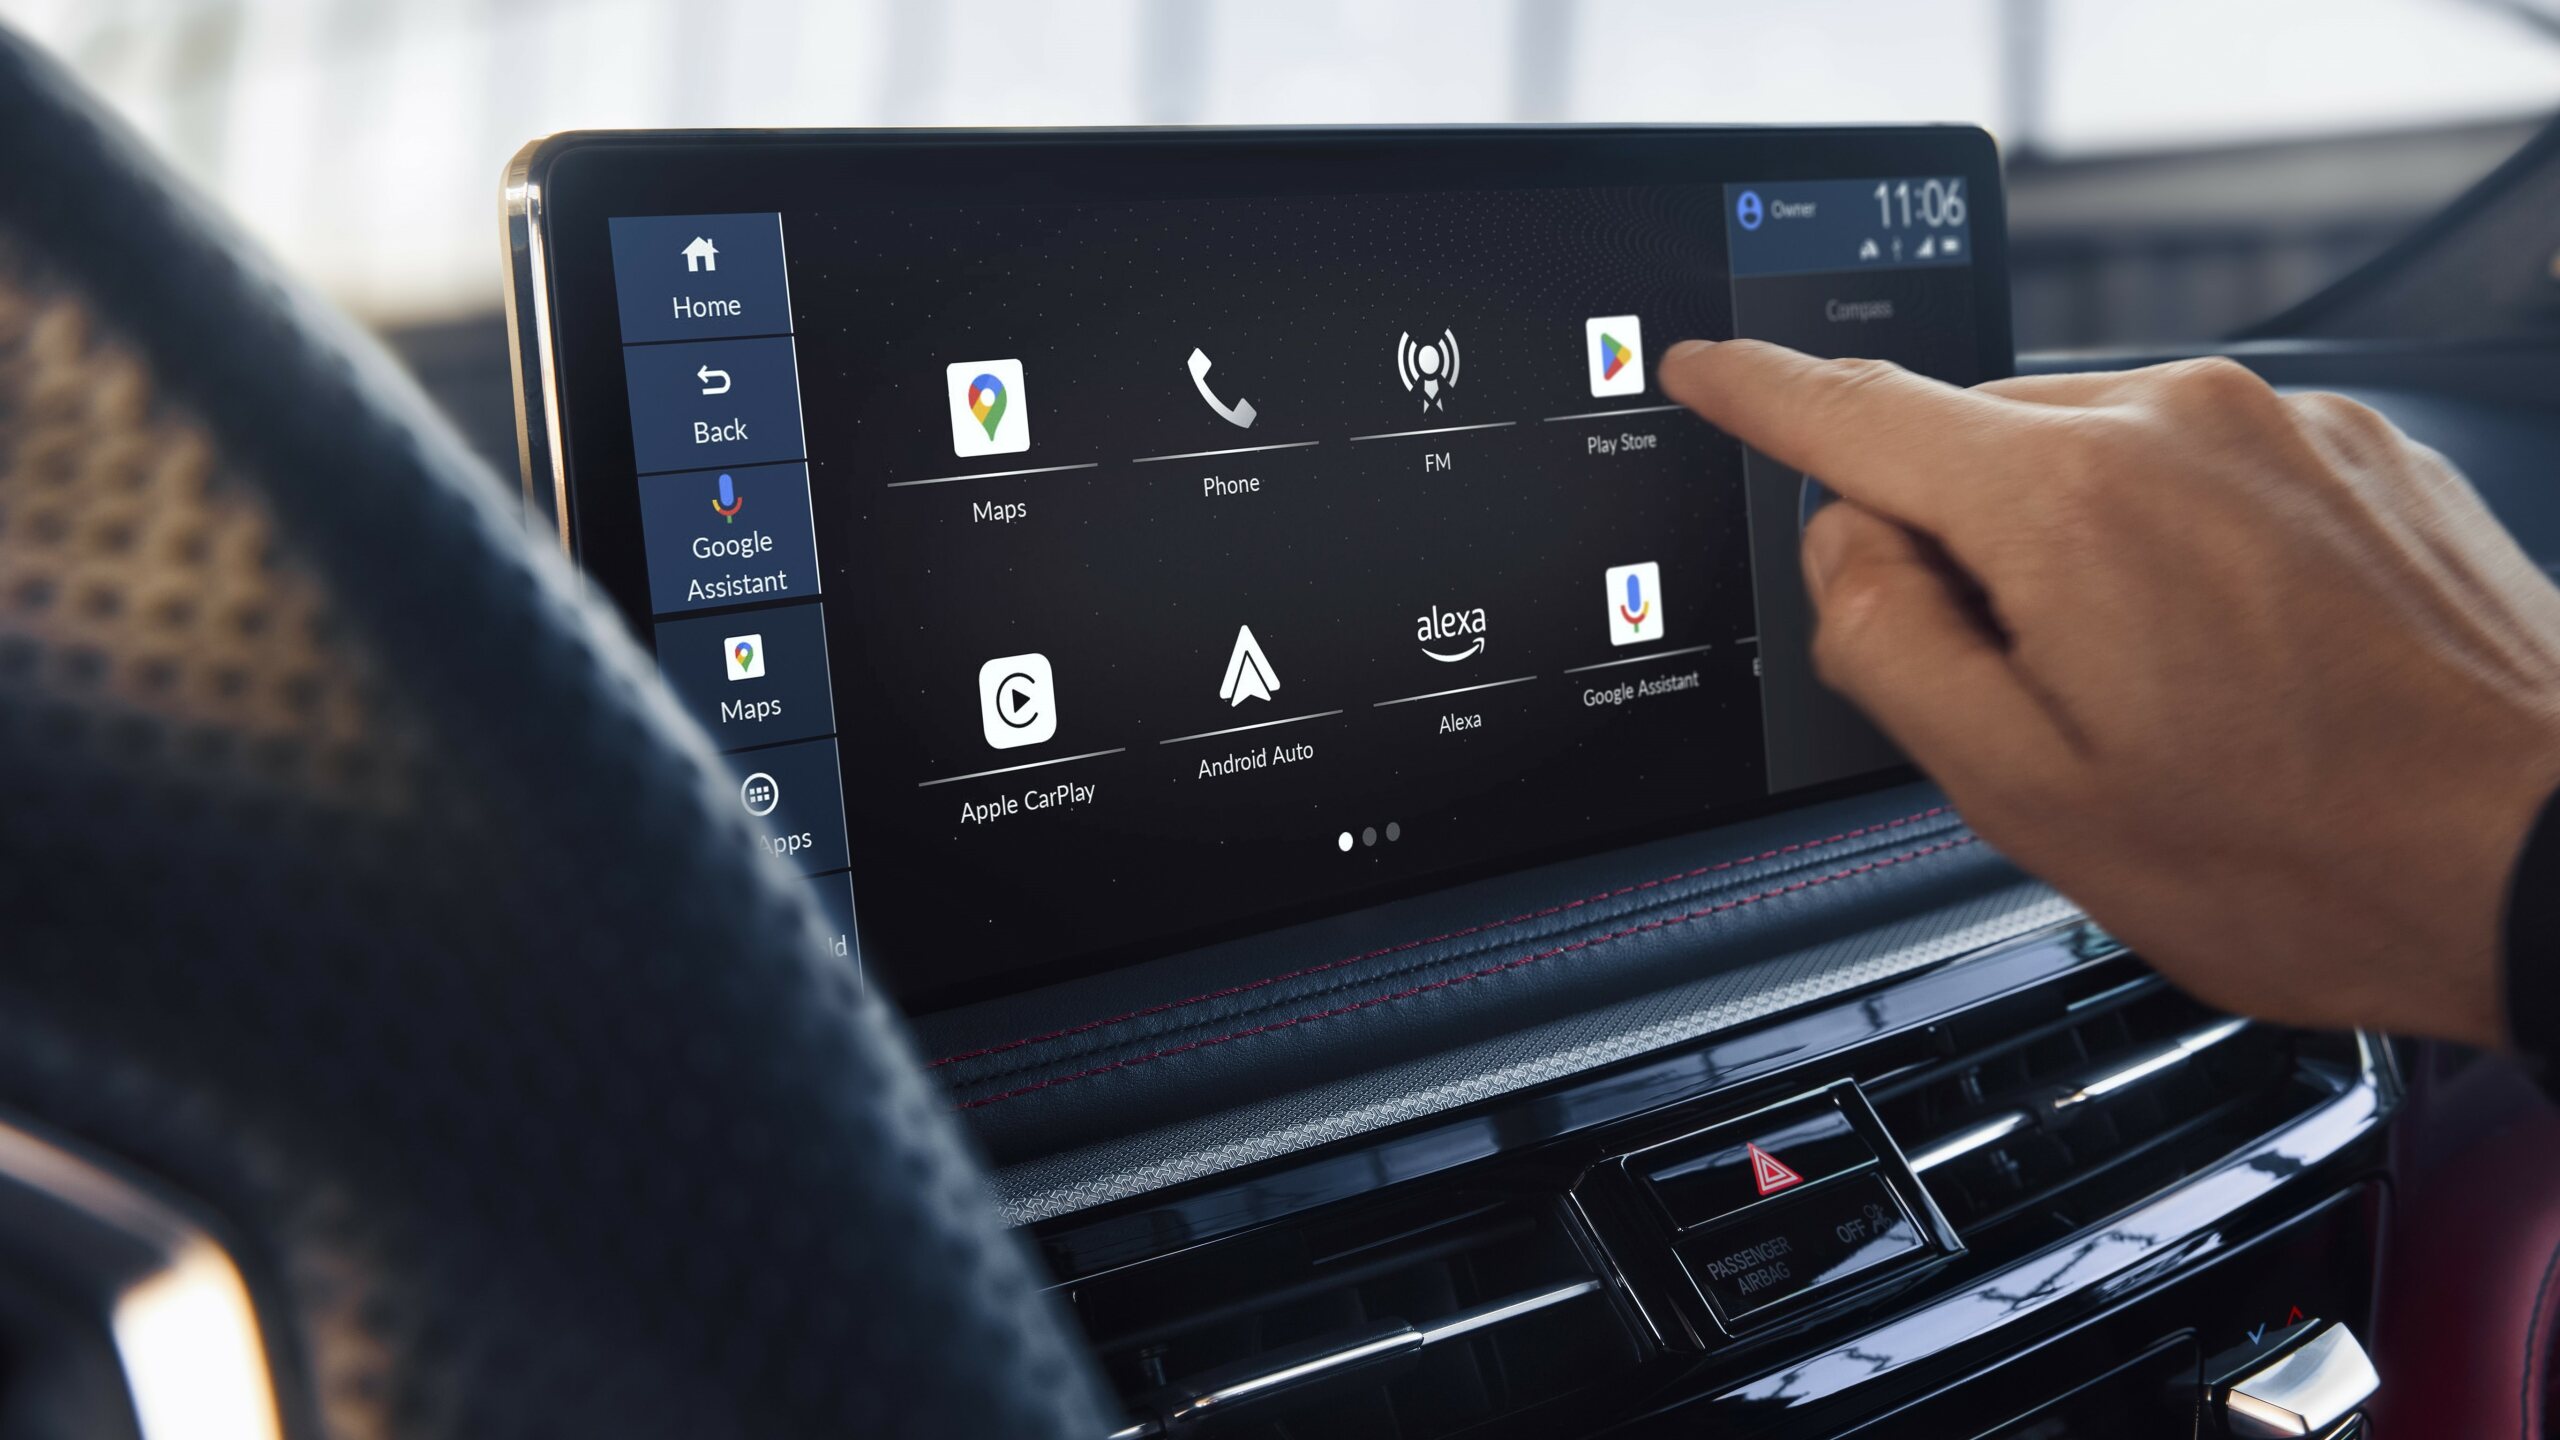 The New 12.3-Inch Touchscreen Interface Featuring Google Built-In Wireless Apple CarPlay And Android Auto (Acura)